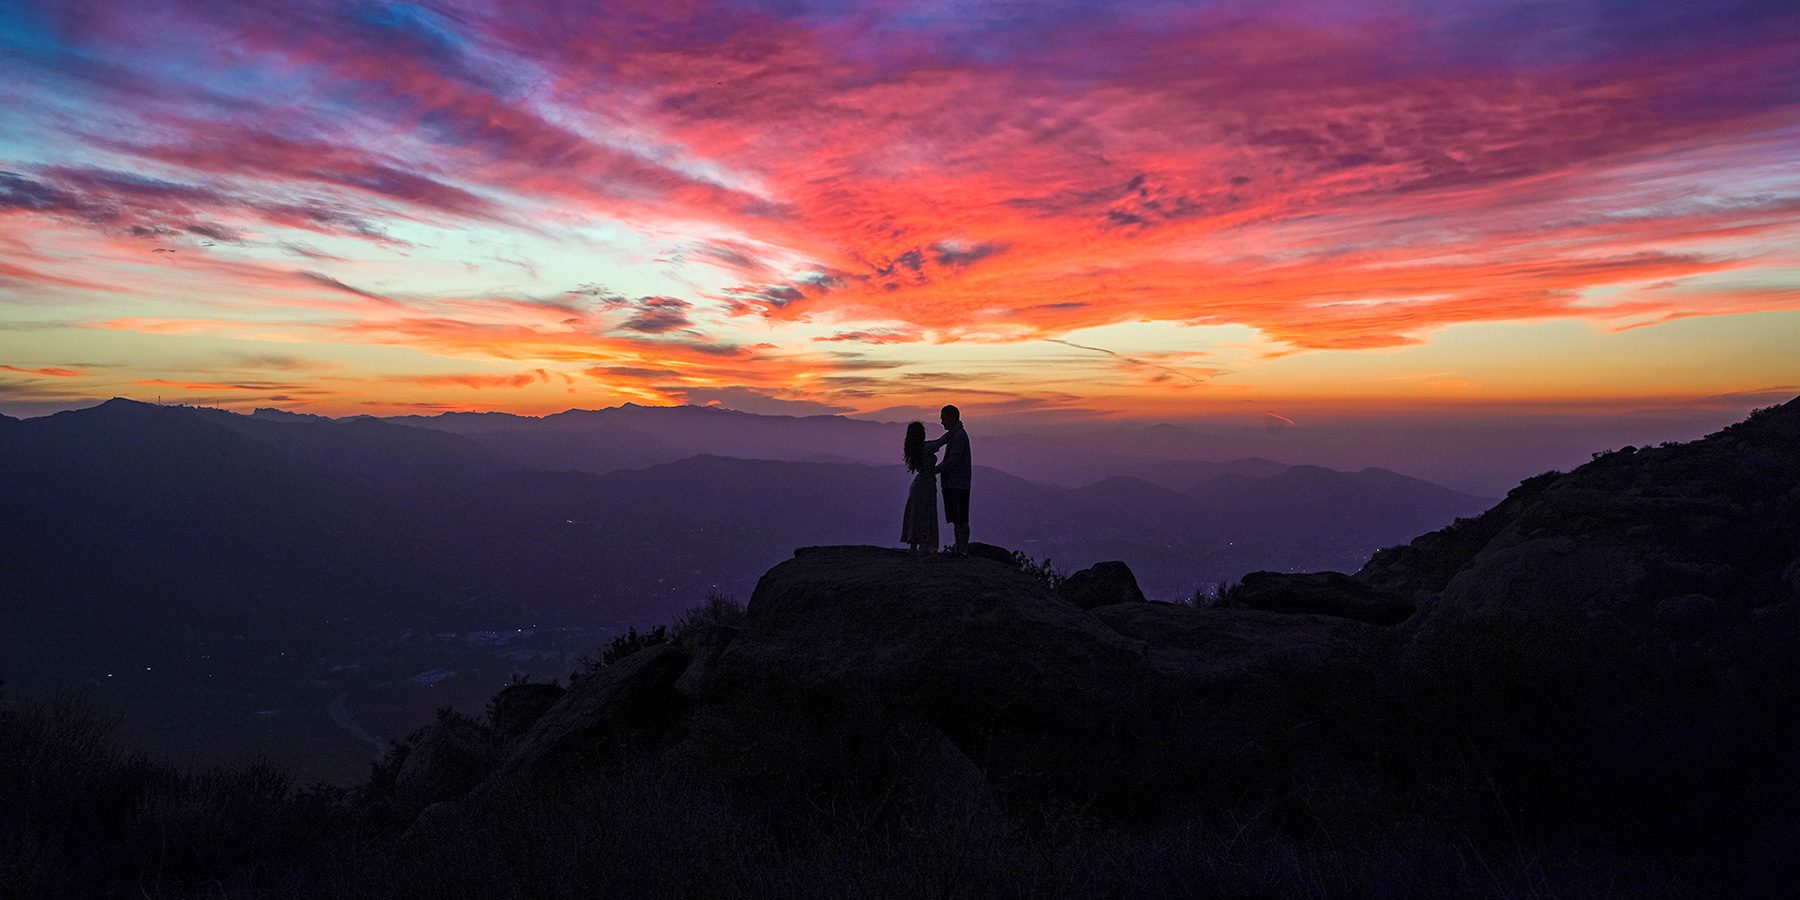 Visit Simi Valley Sunset Lovers